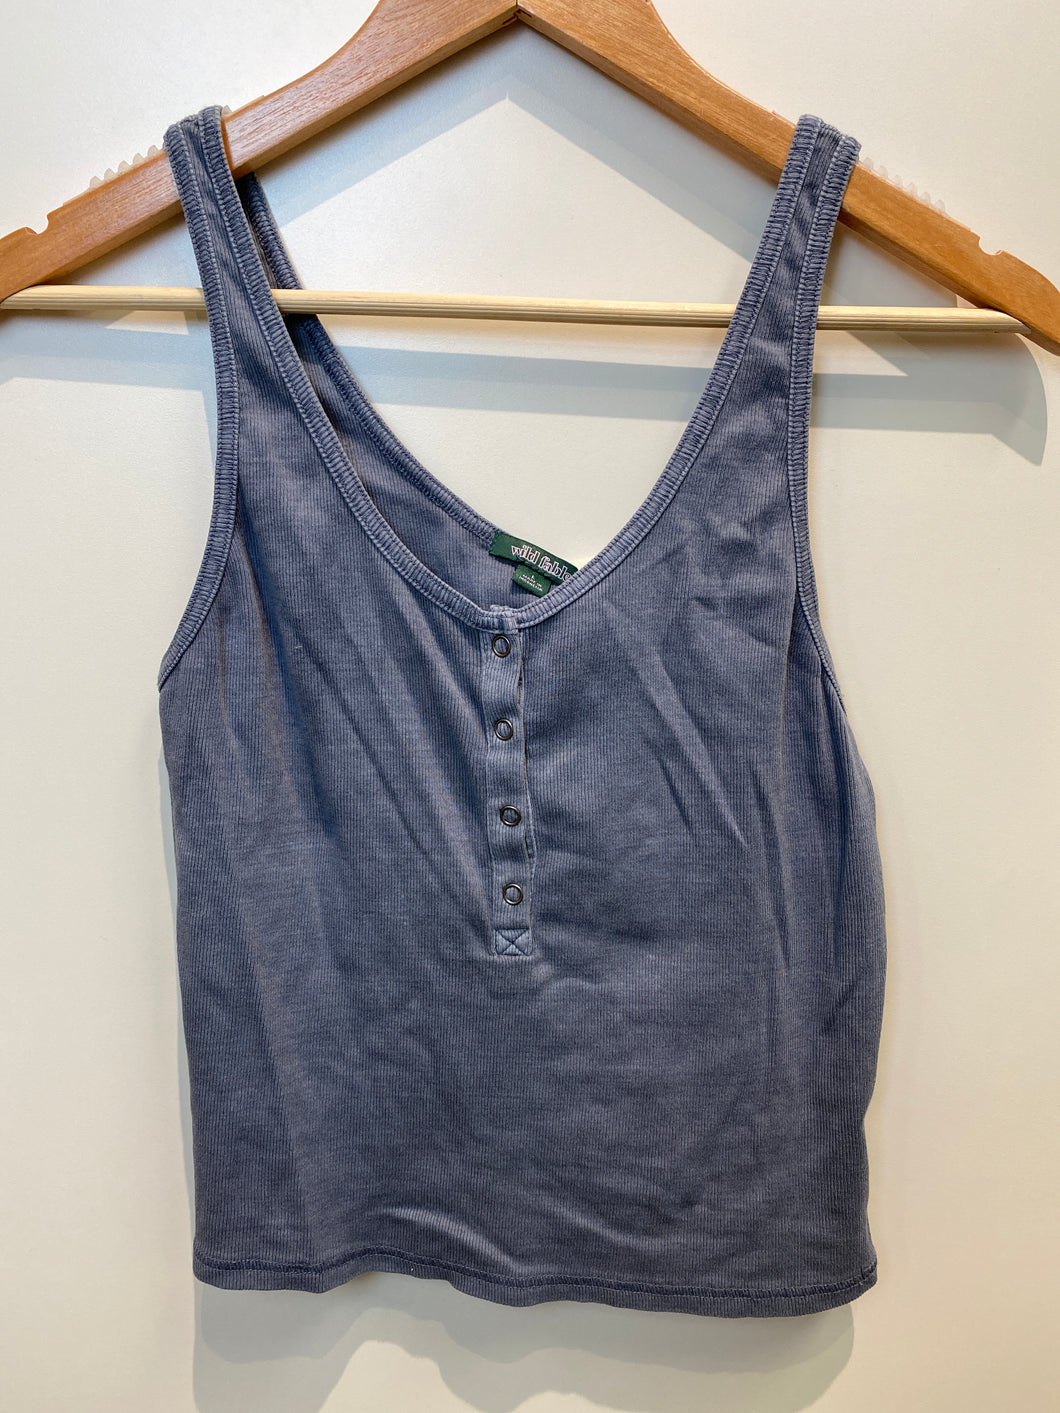 Wild Fable Tank Top Size Large